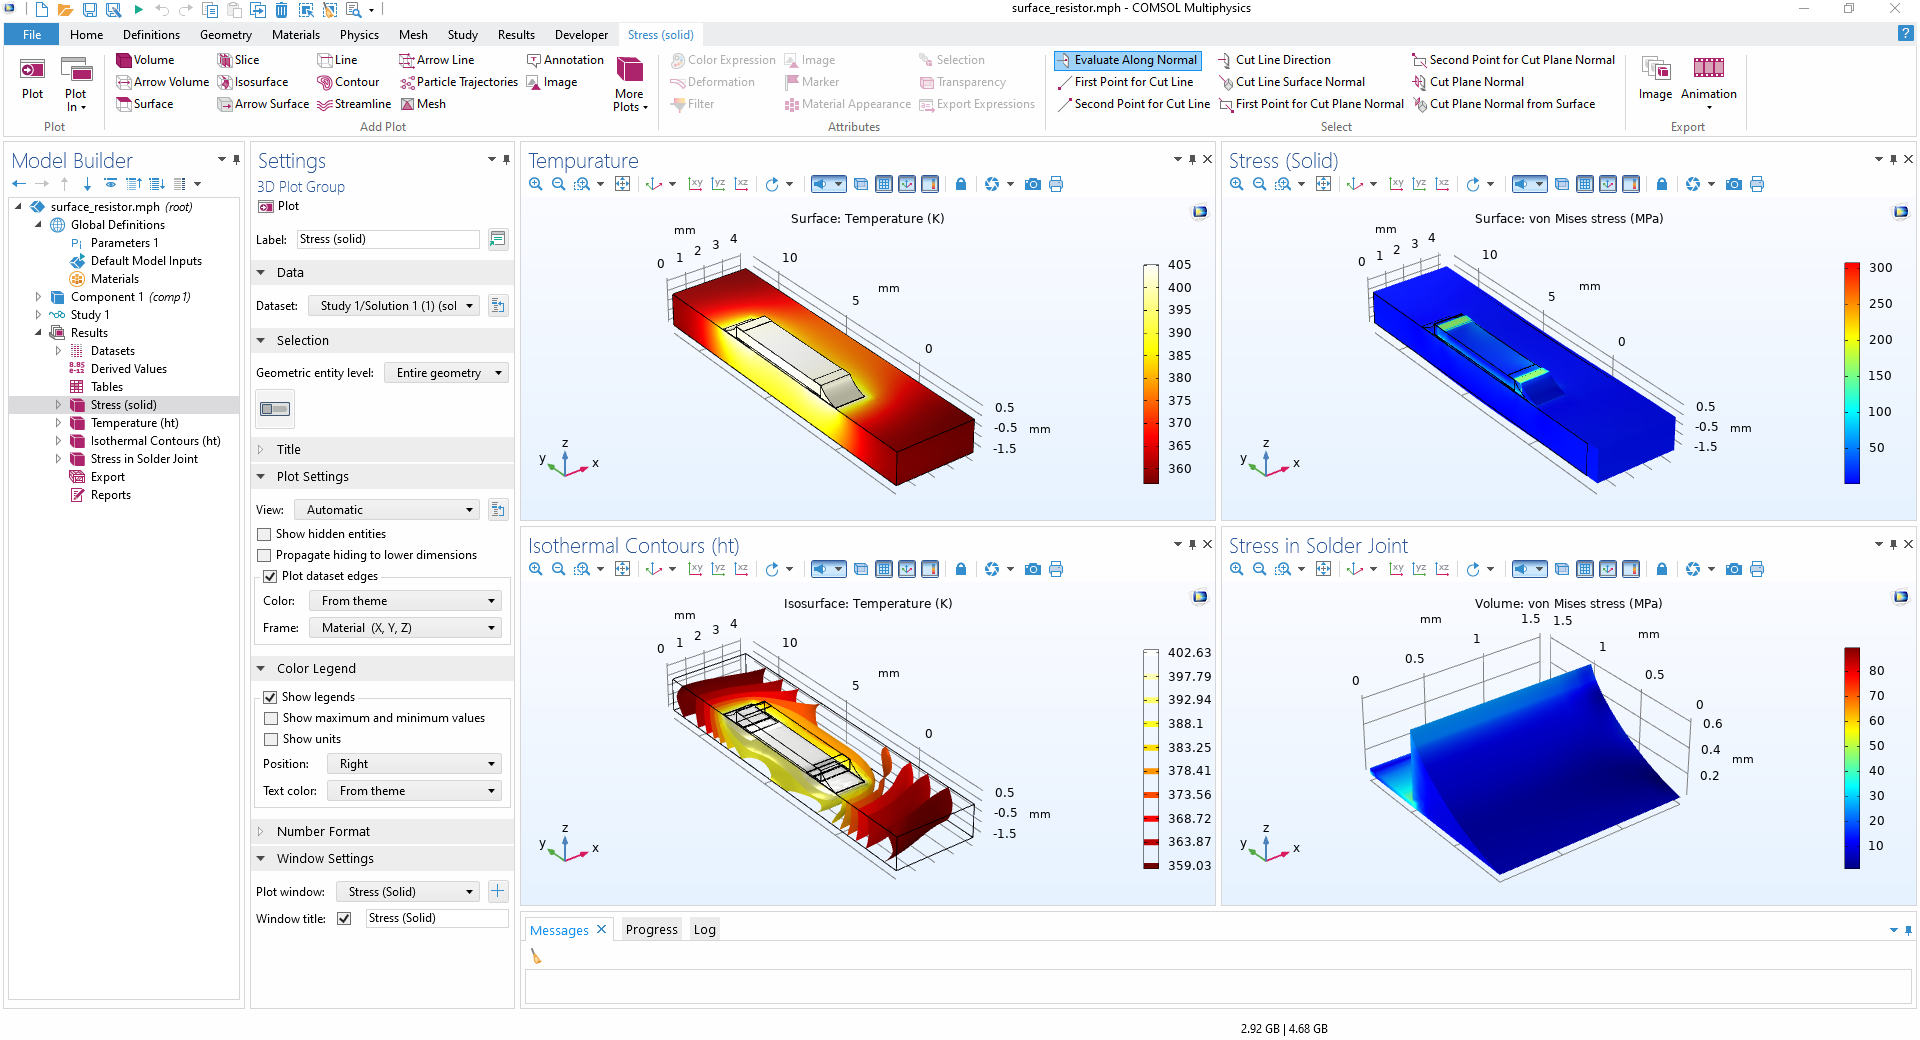 Nuevo curso "How to Navigate the COMSOL Multiphysics® User Interface"